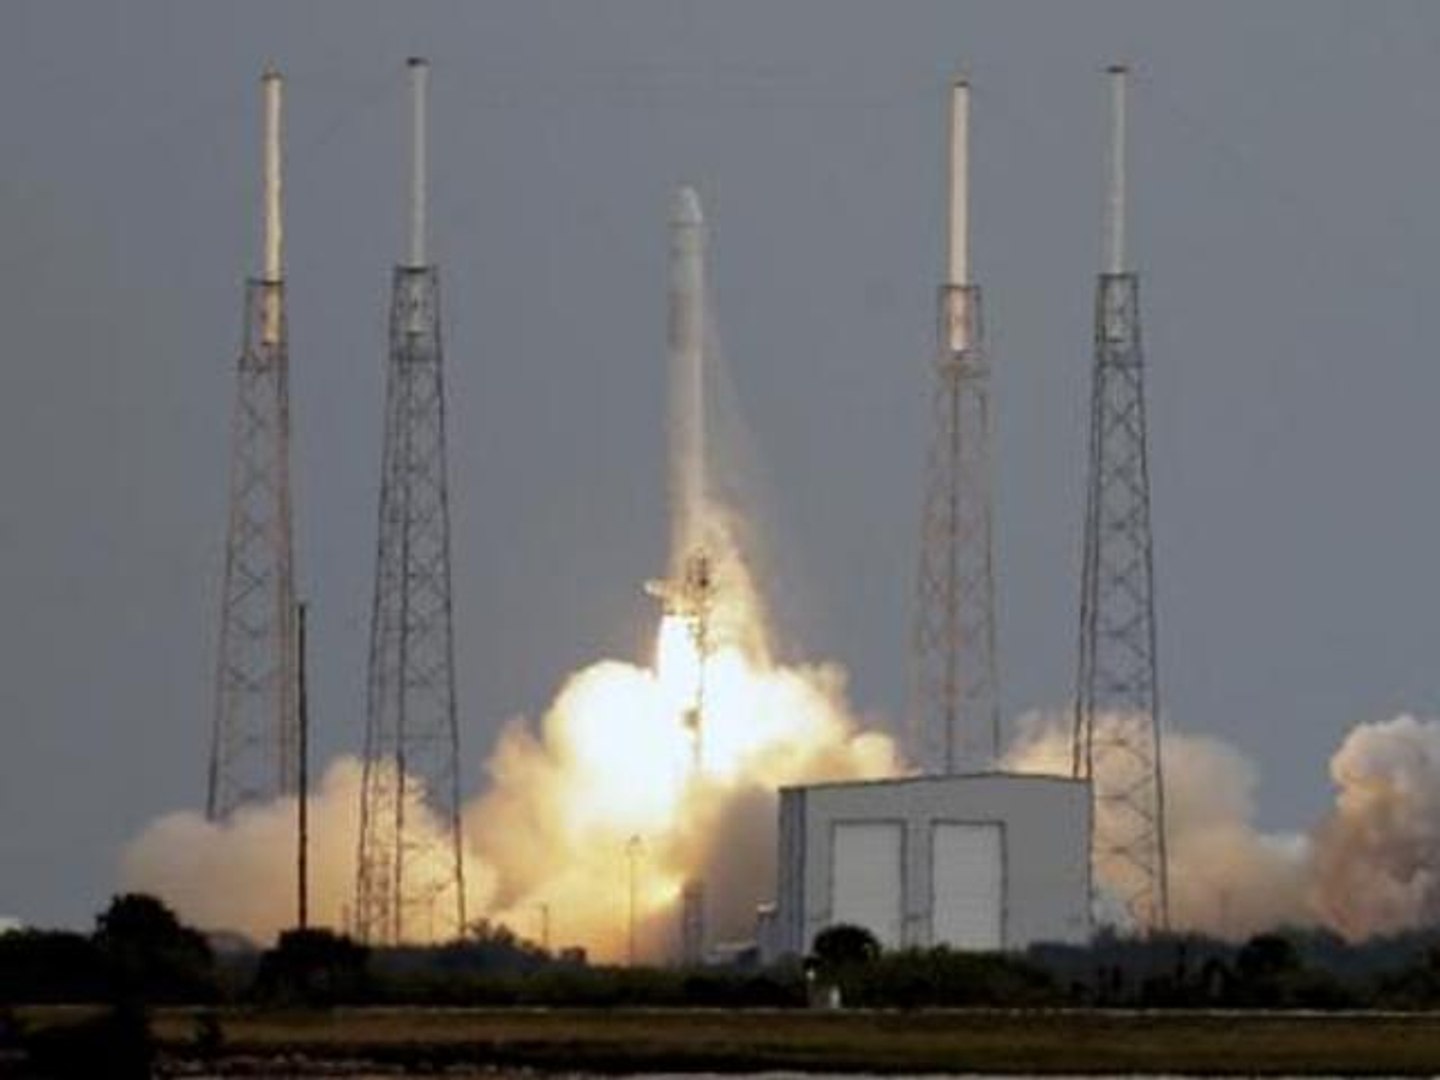 SpaceX capsule to supply ISS hits trouble